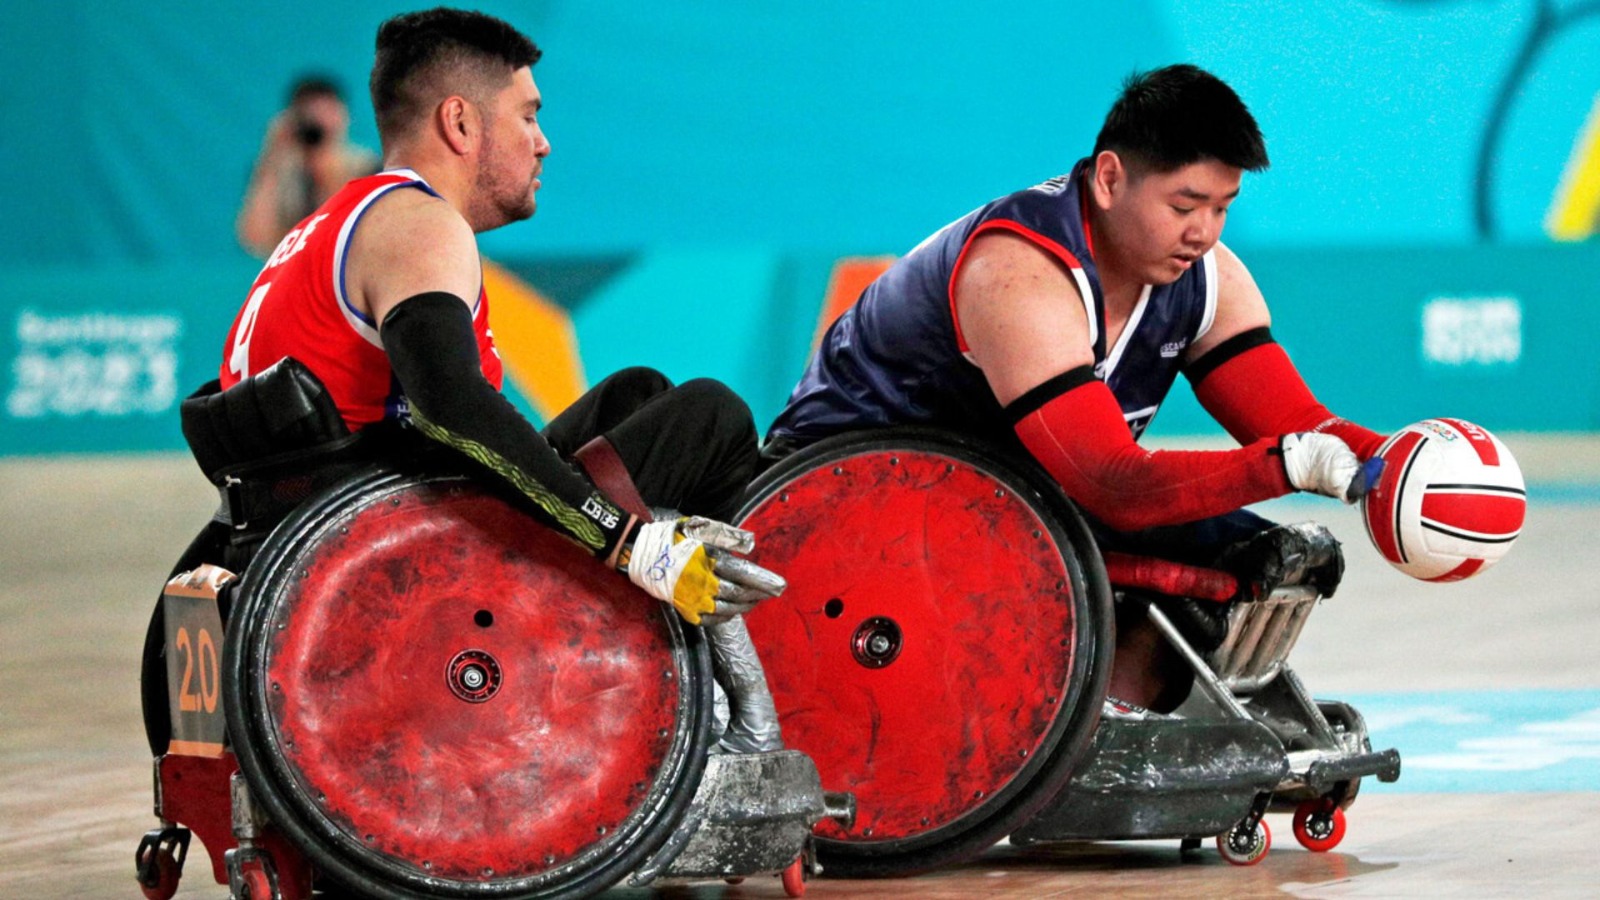 Wheelchair Rugby: United States Demonstrates Dominance Against Chile